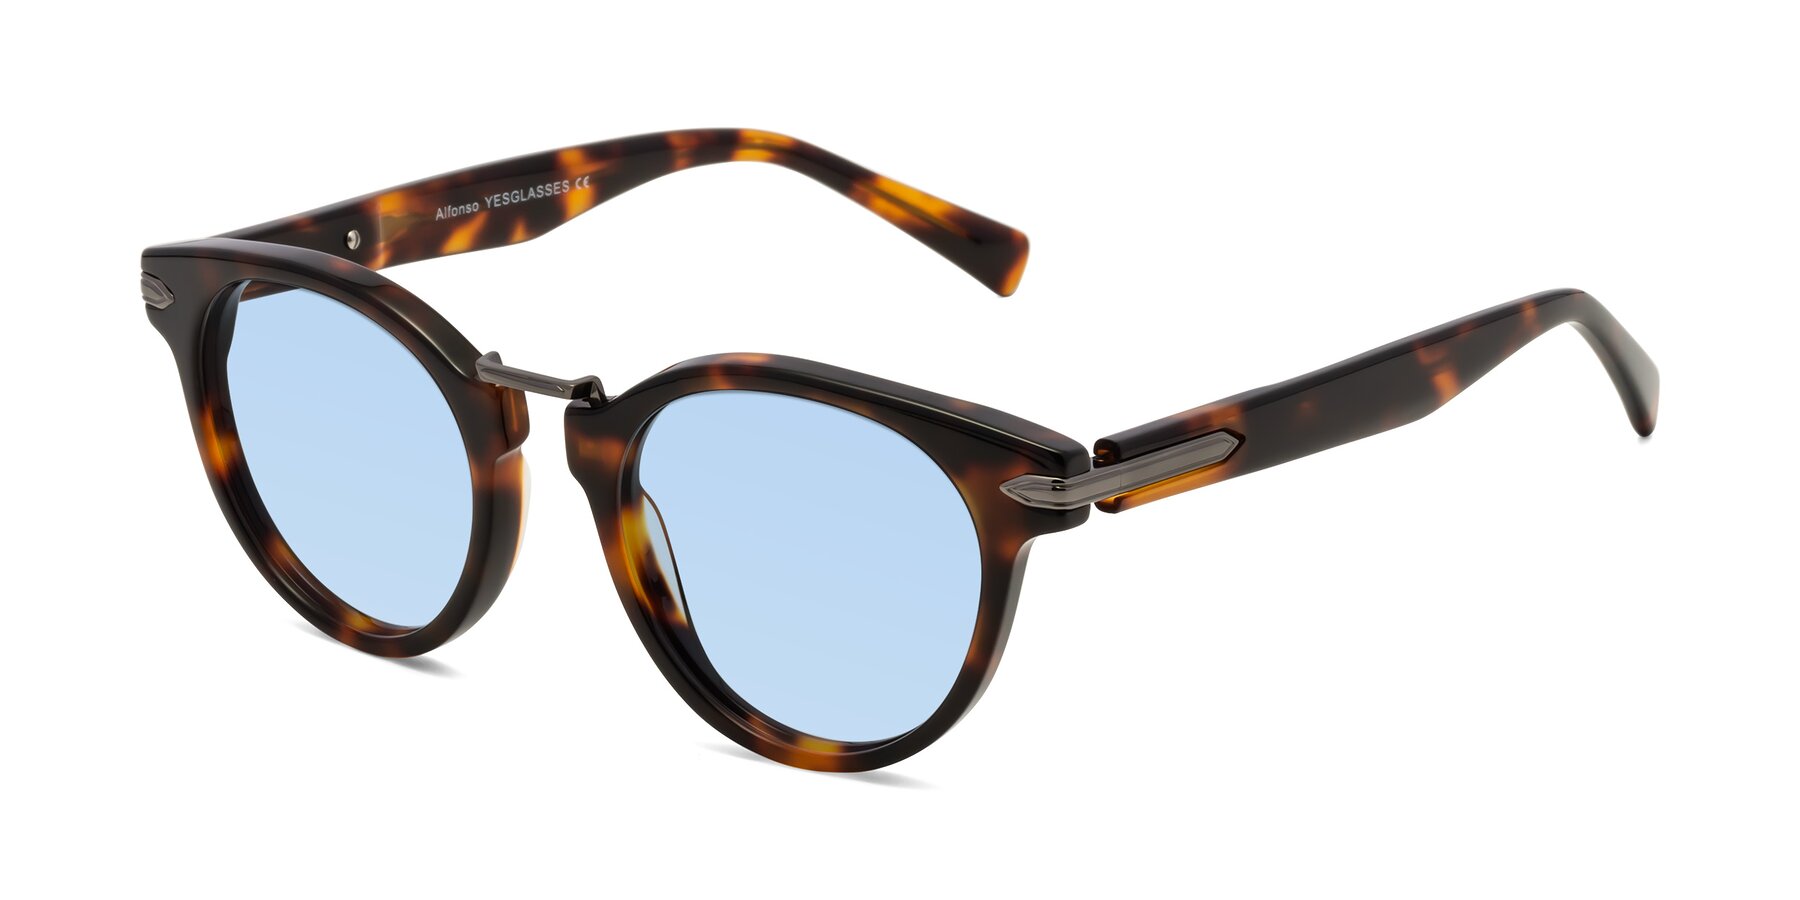 Angle of Alfonso in Tortoise with Light Blue Tinted Lenses